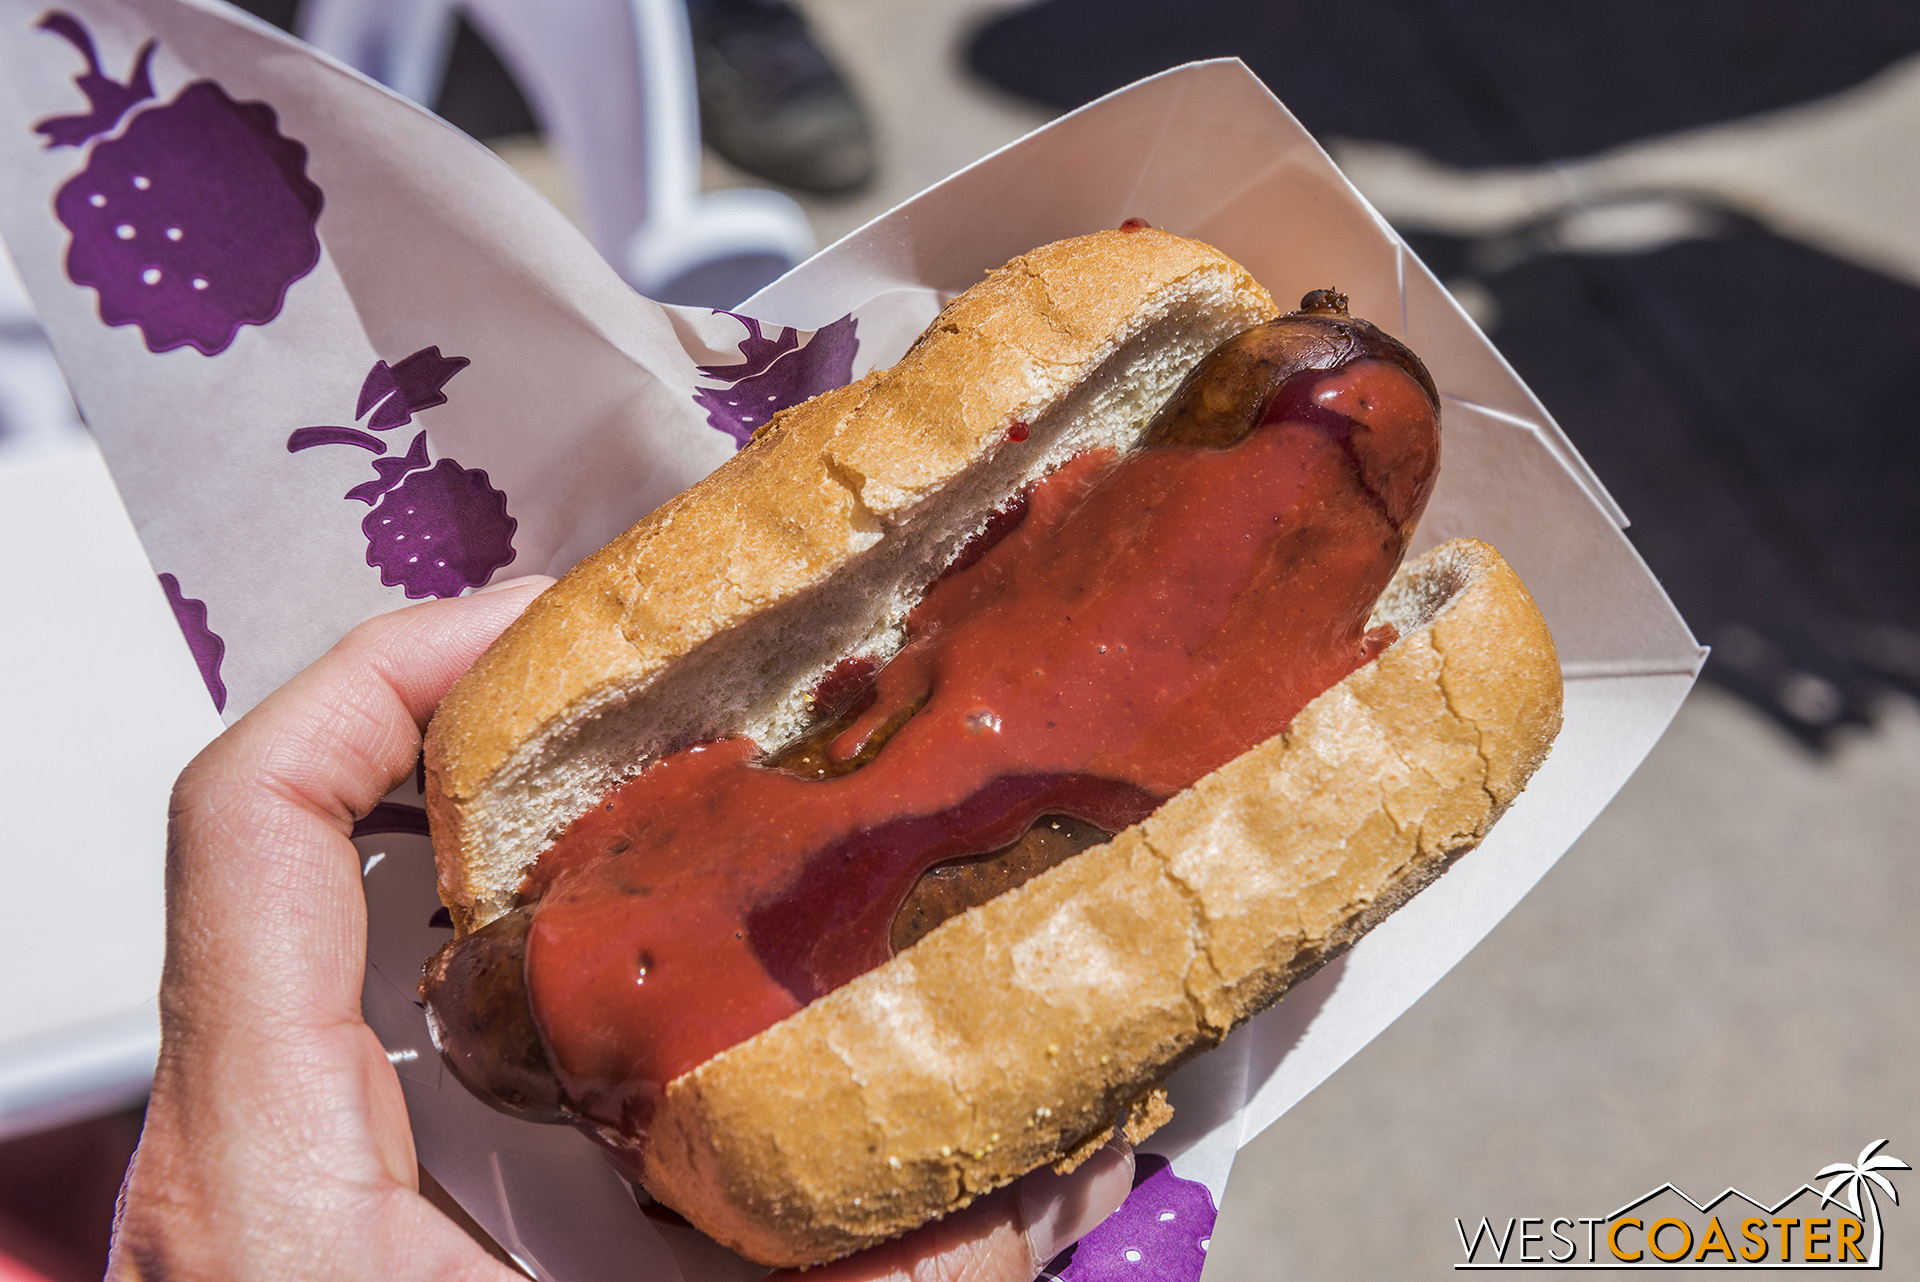  Boysenberry Sausage is found outside Wilderness Dance Hall. 